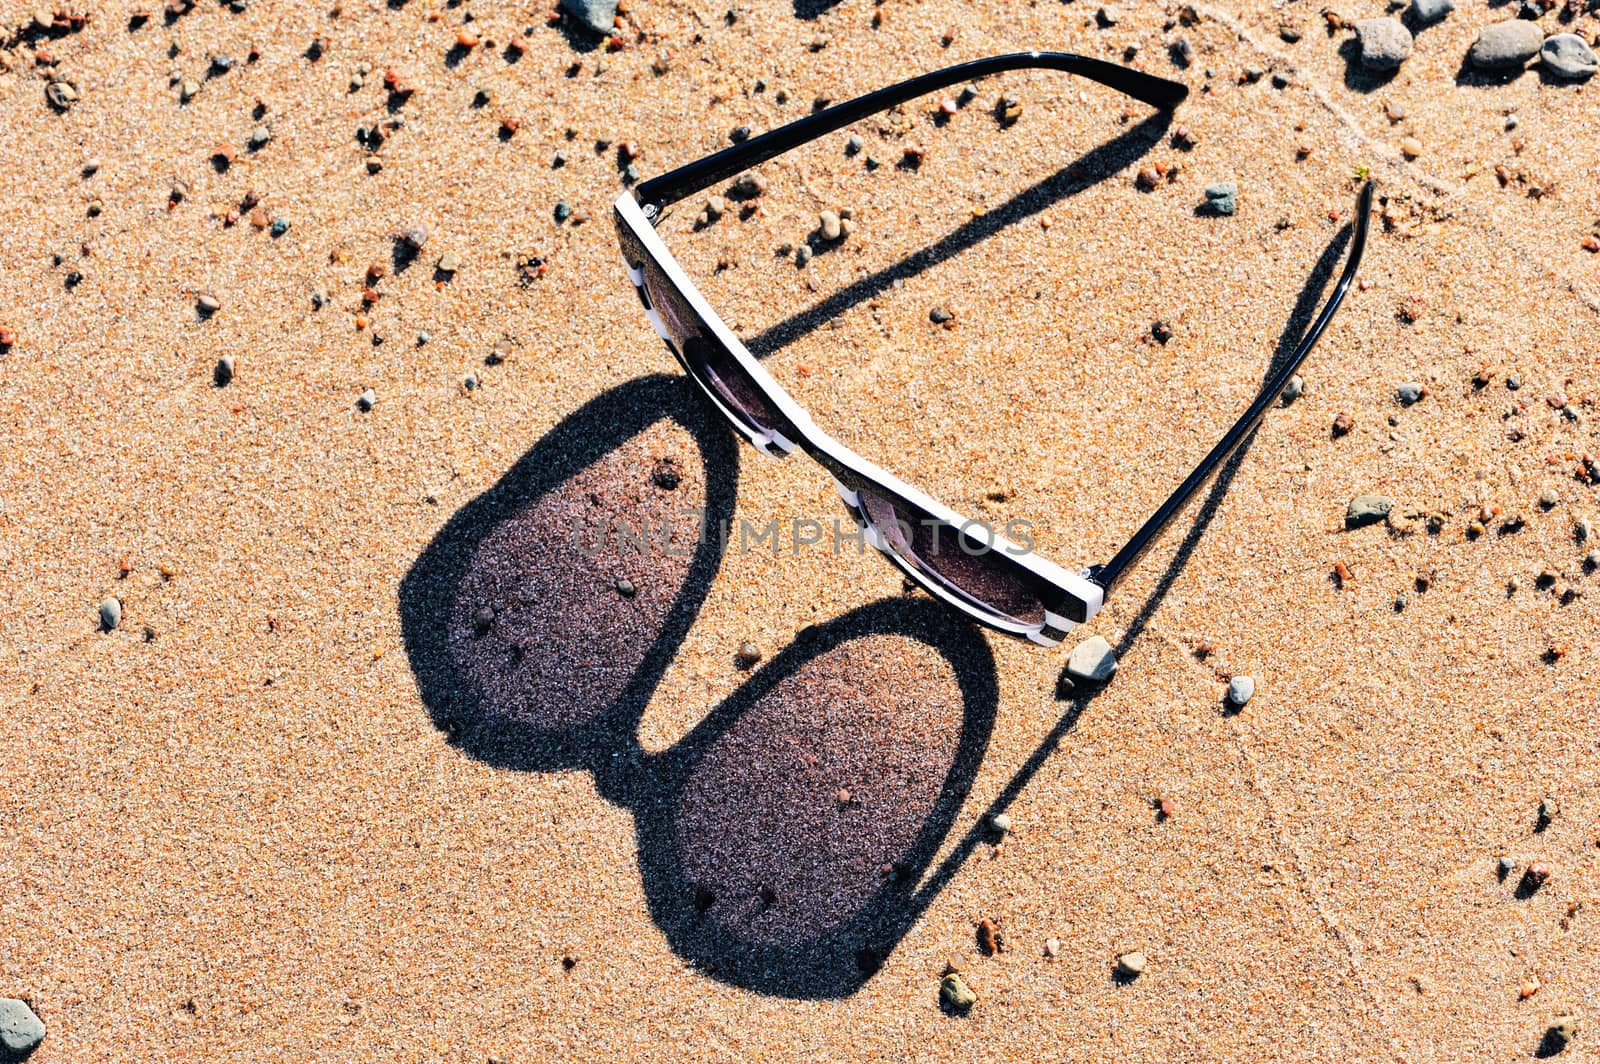 Reflection from plastic sunglasses in the sand